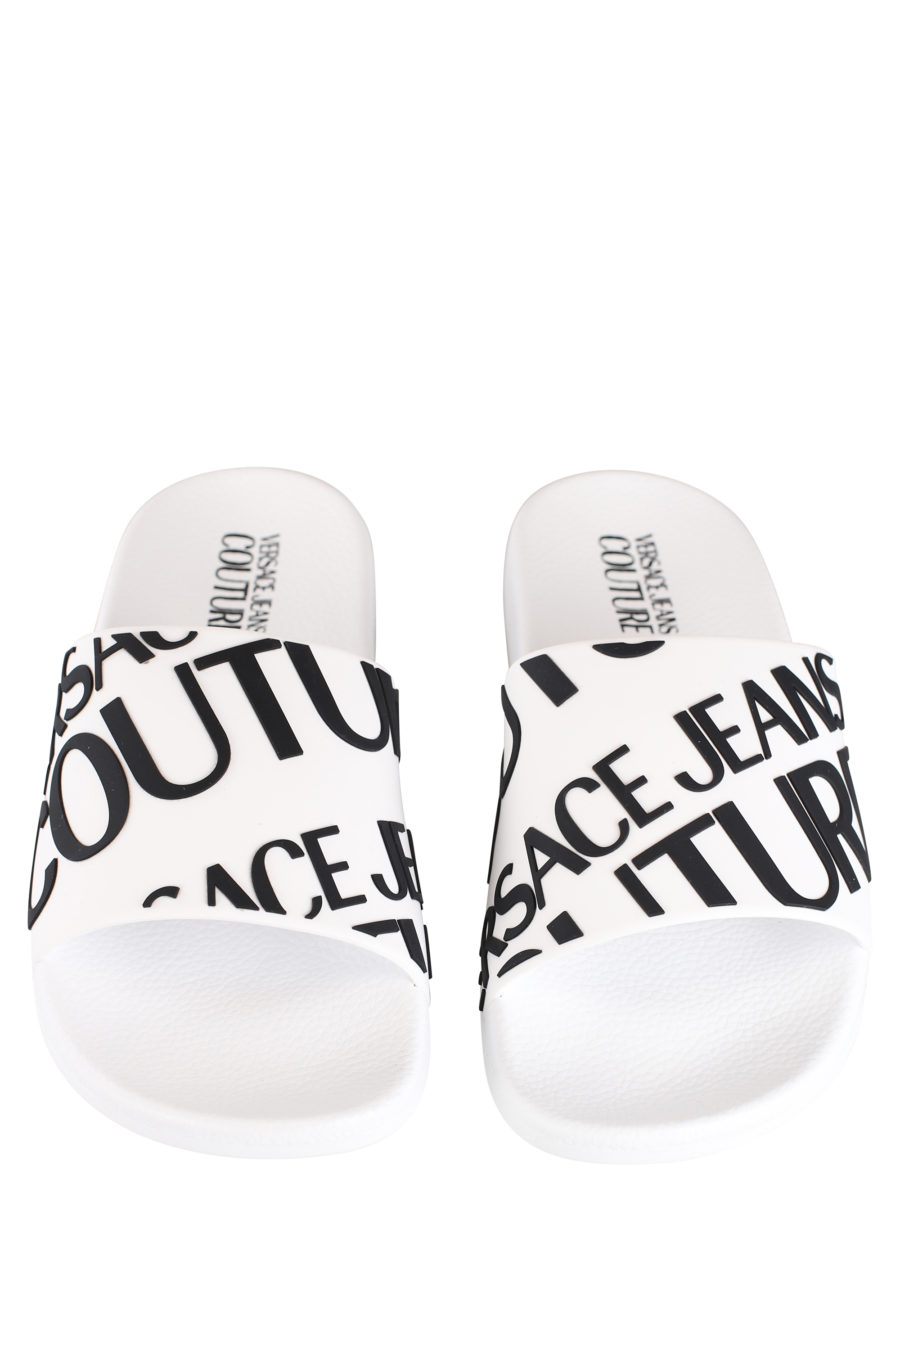 White rubber flip flops with embossed logo "Shelly" - IMG 9639